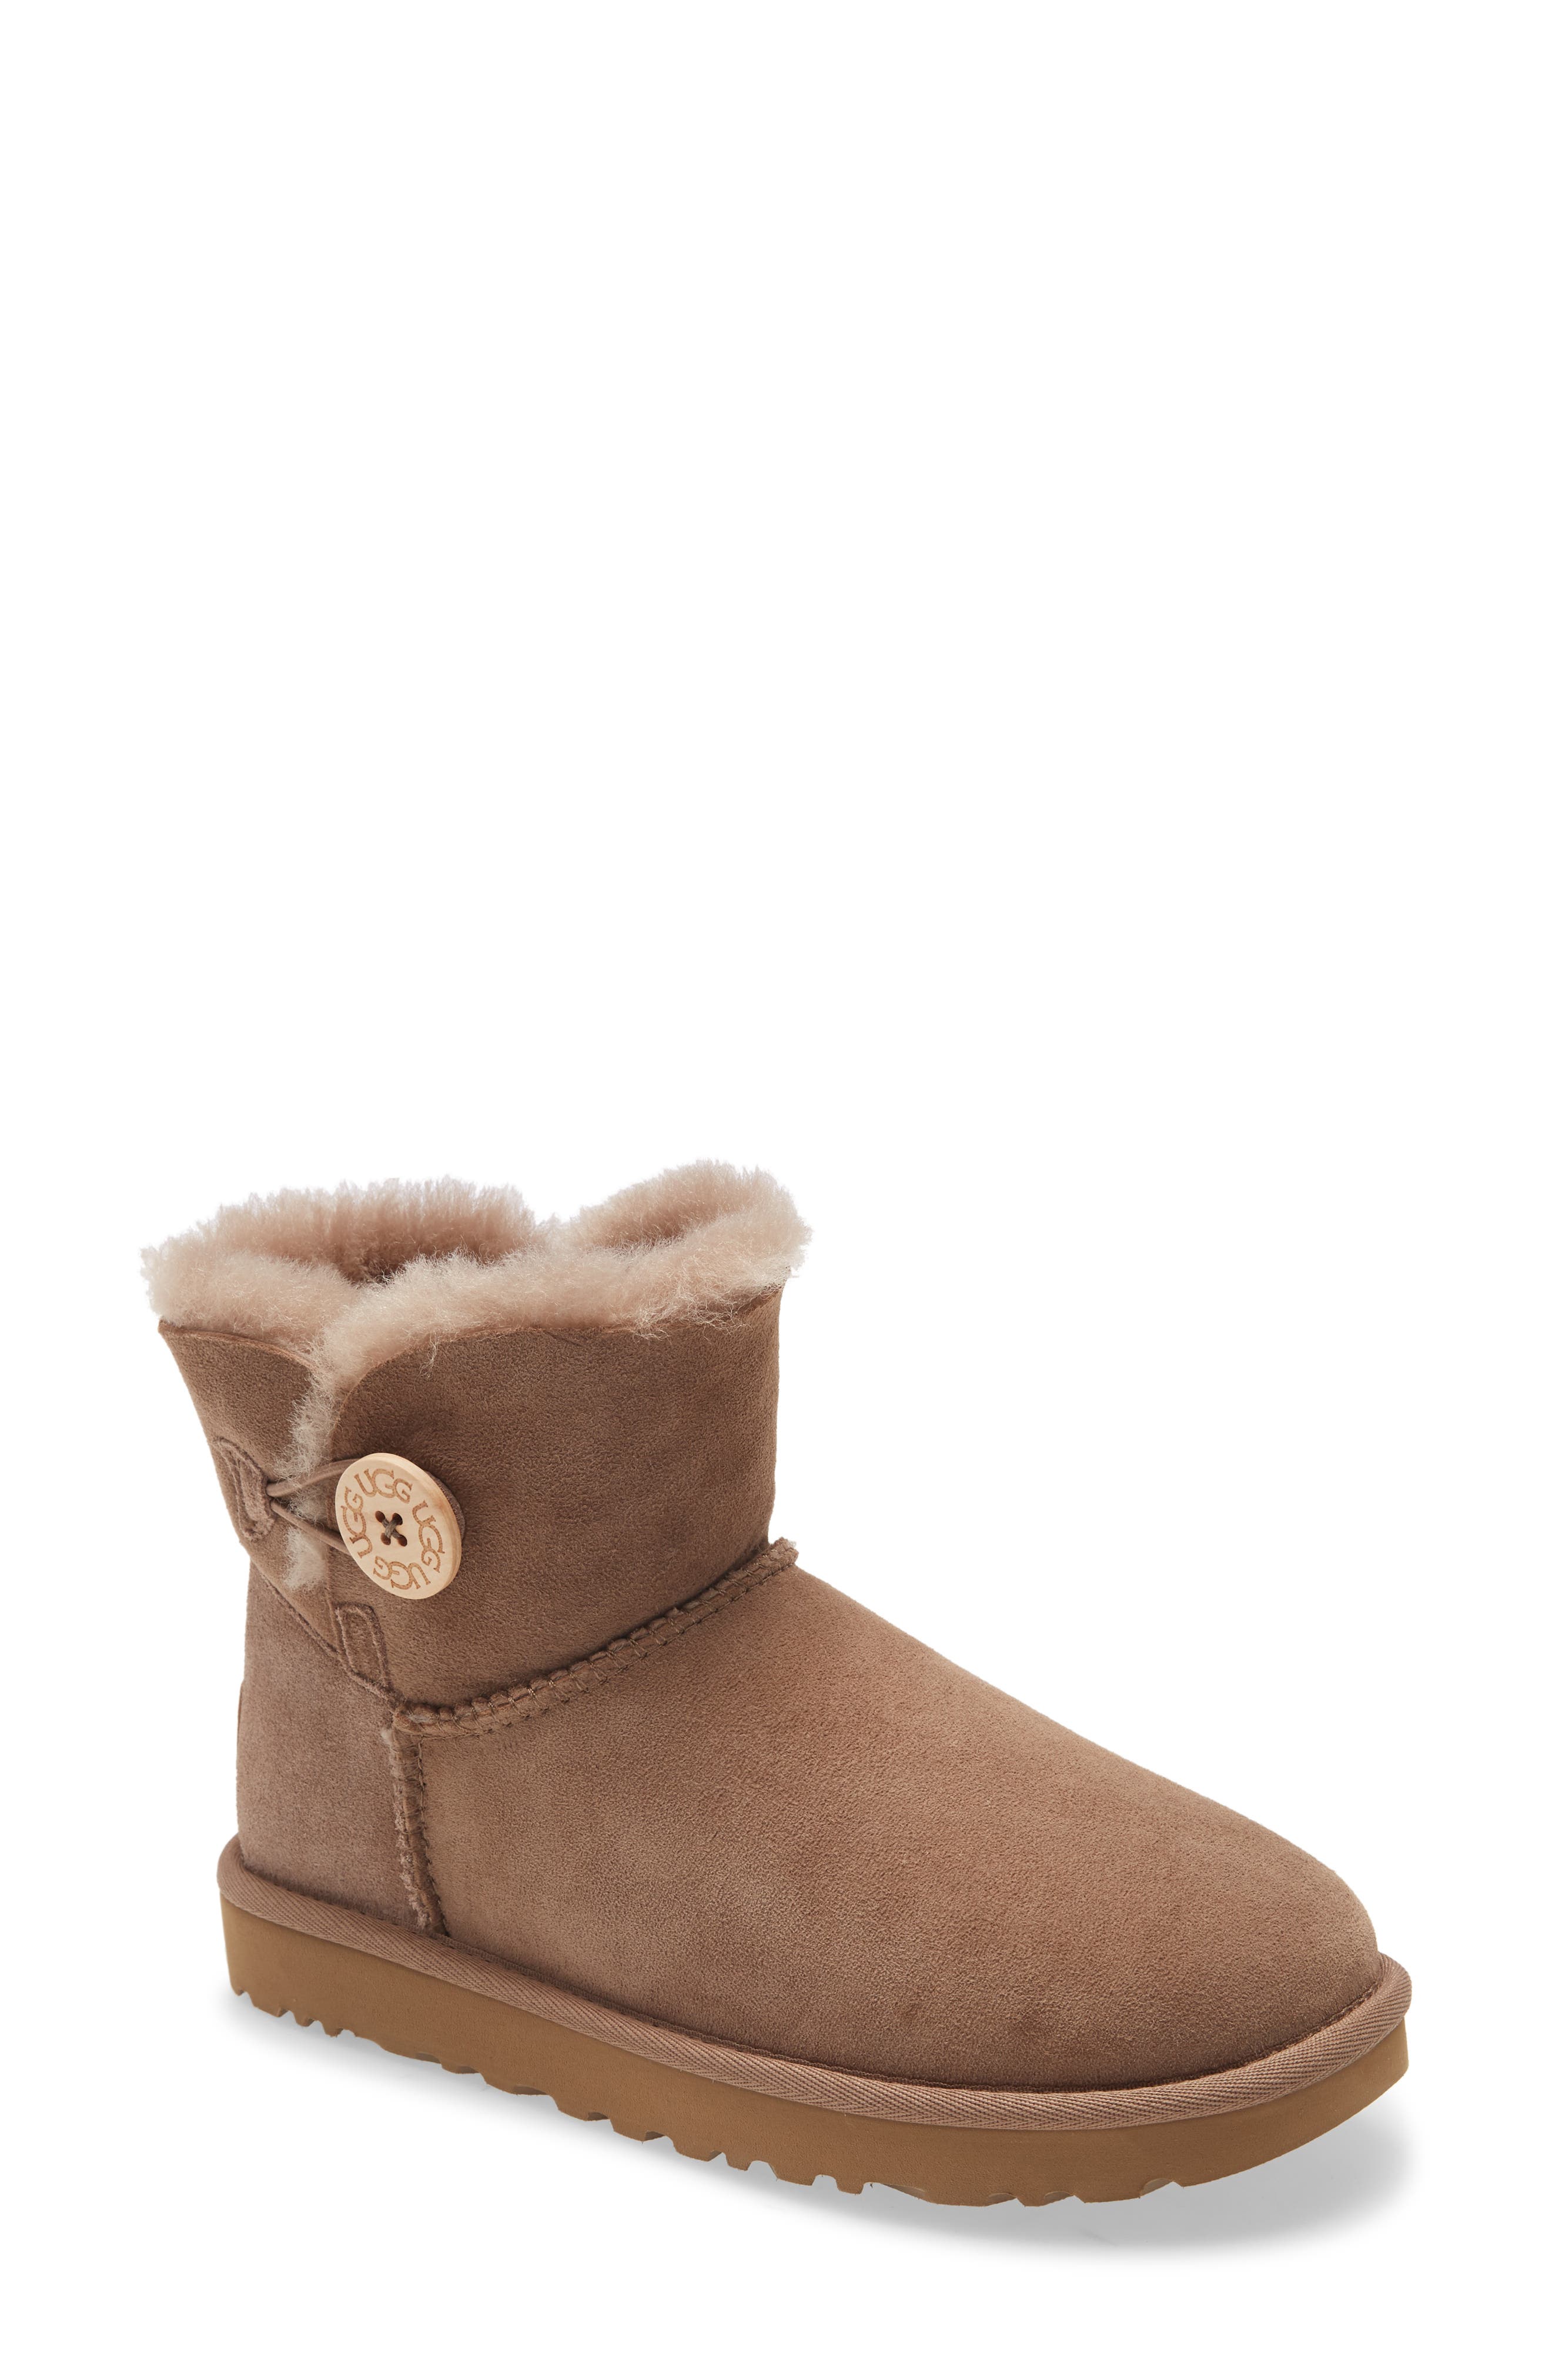 authentic ugg slippers